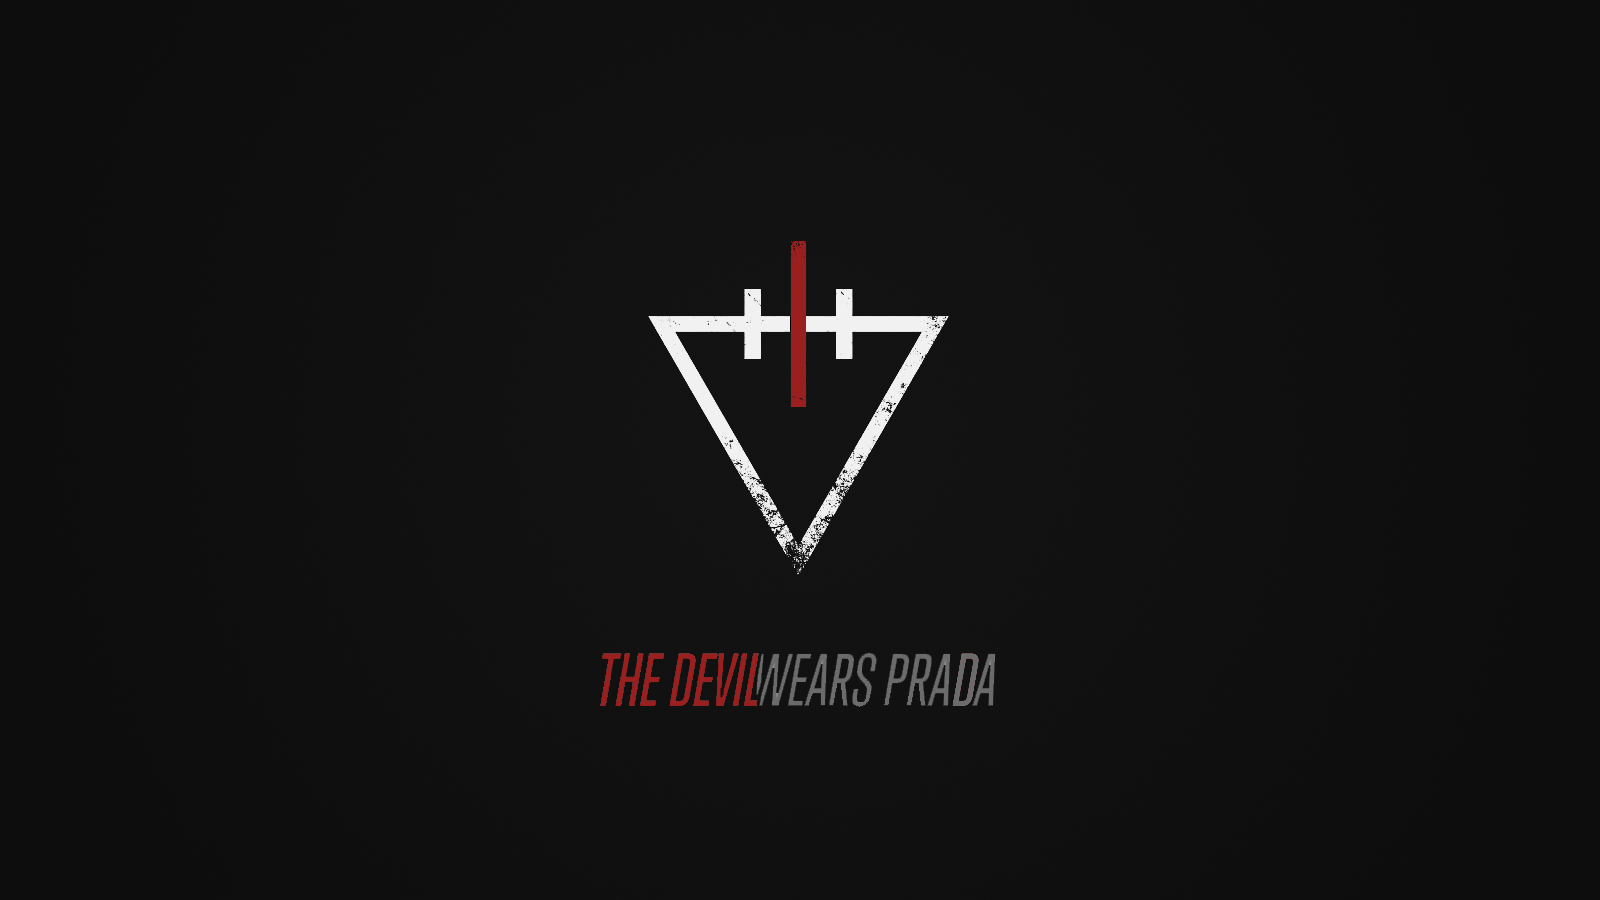 The Devil Wears Prada Band Wallpapers Group (62+)